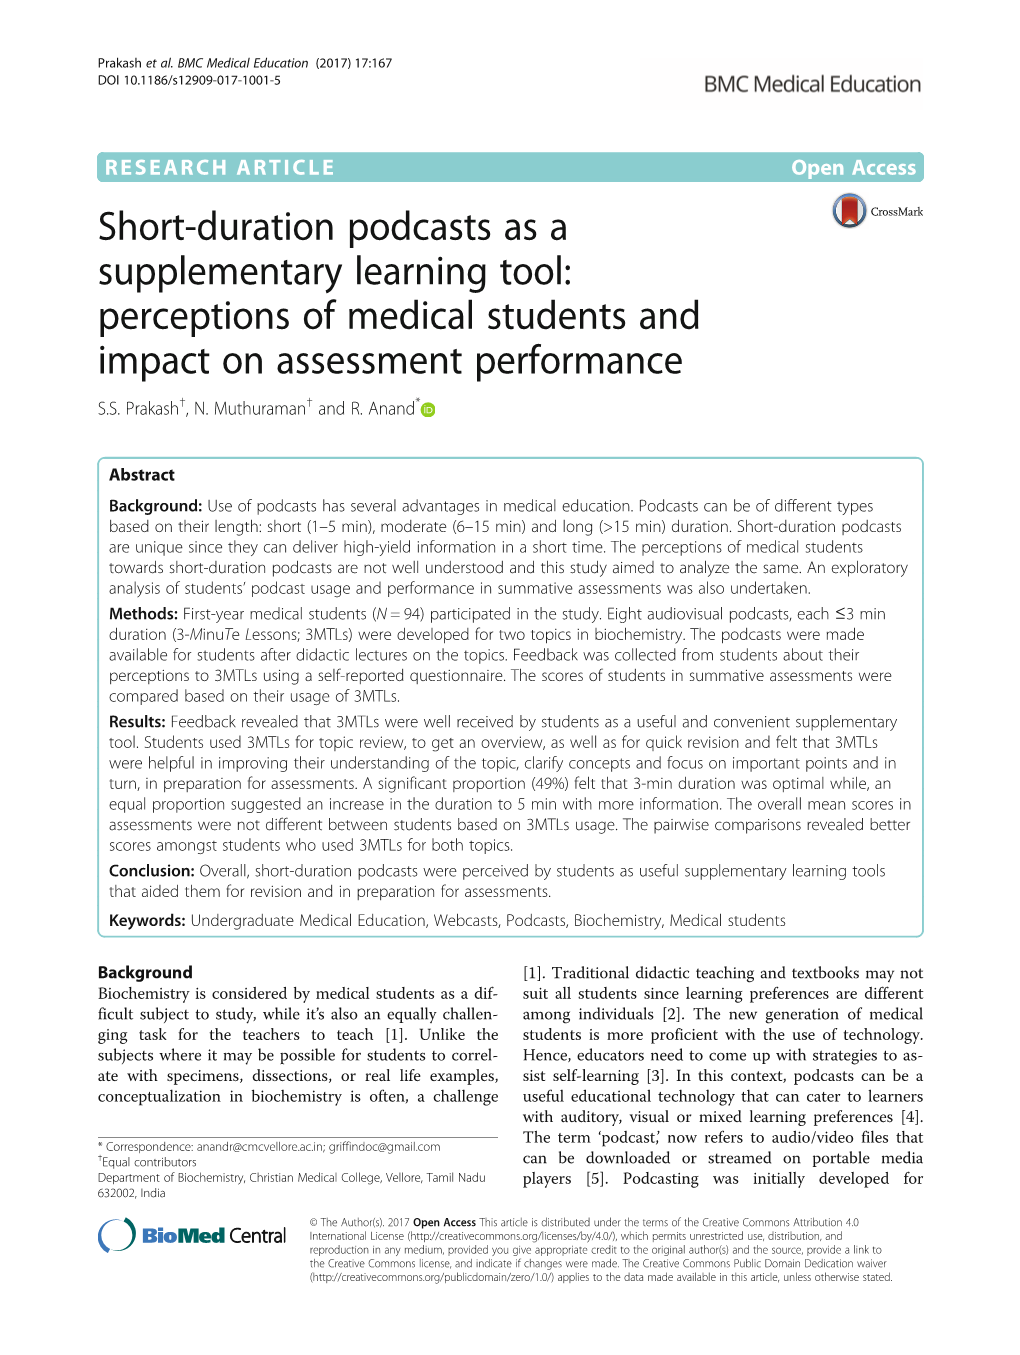 Short-Duration Podcasts As a Supplementary Learning Tool: Perceptions of Medical Students and Impact on Assessment Performance S.S